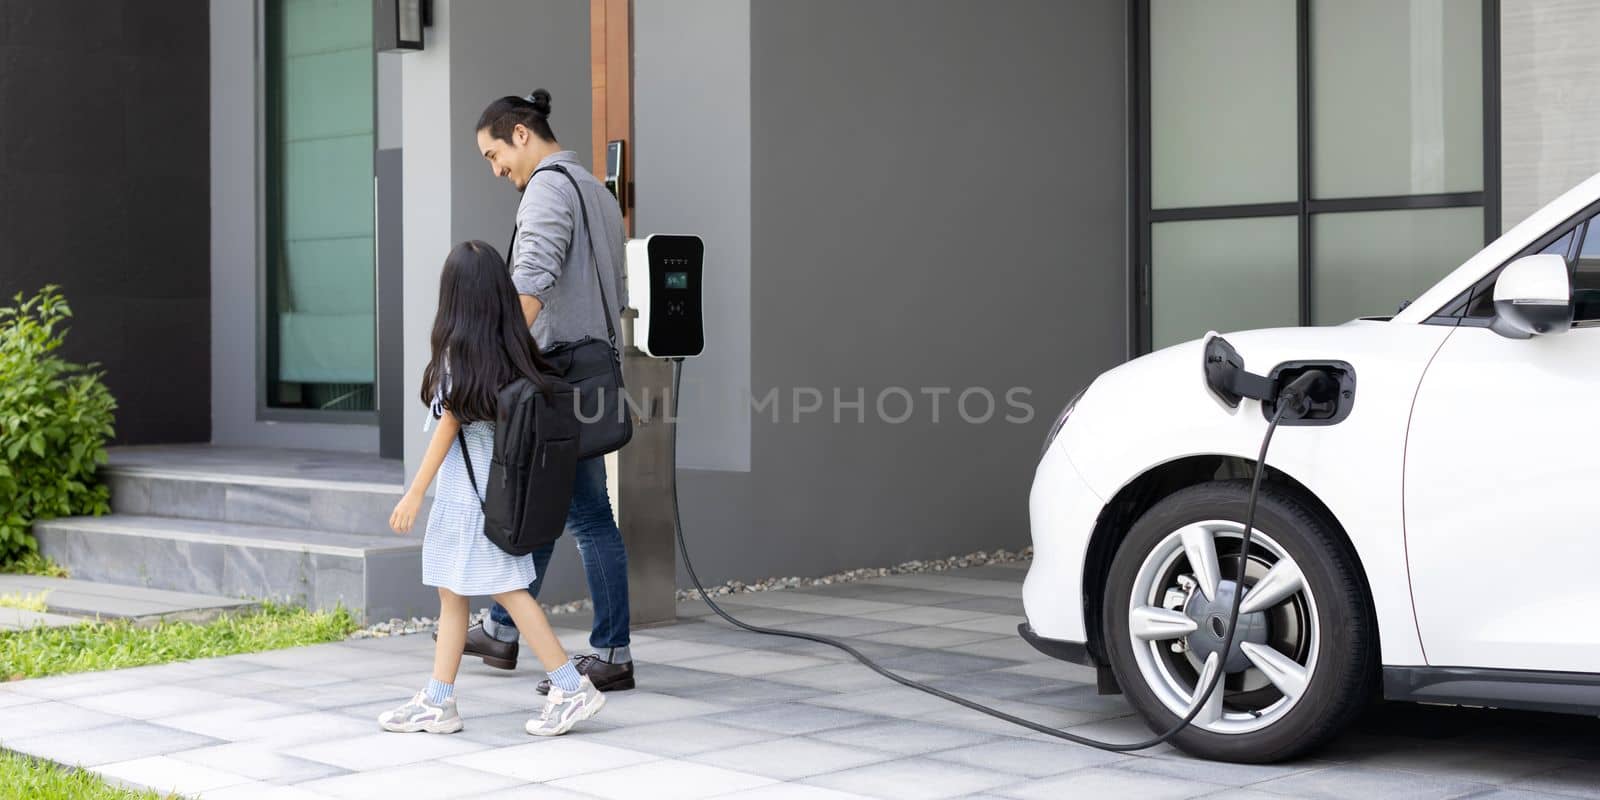 Progressive dad and daughter charging EV car from home charging station. by biancoblue